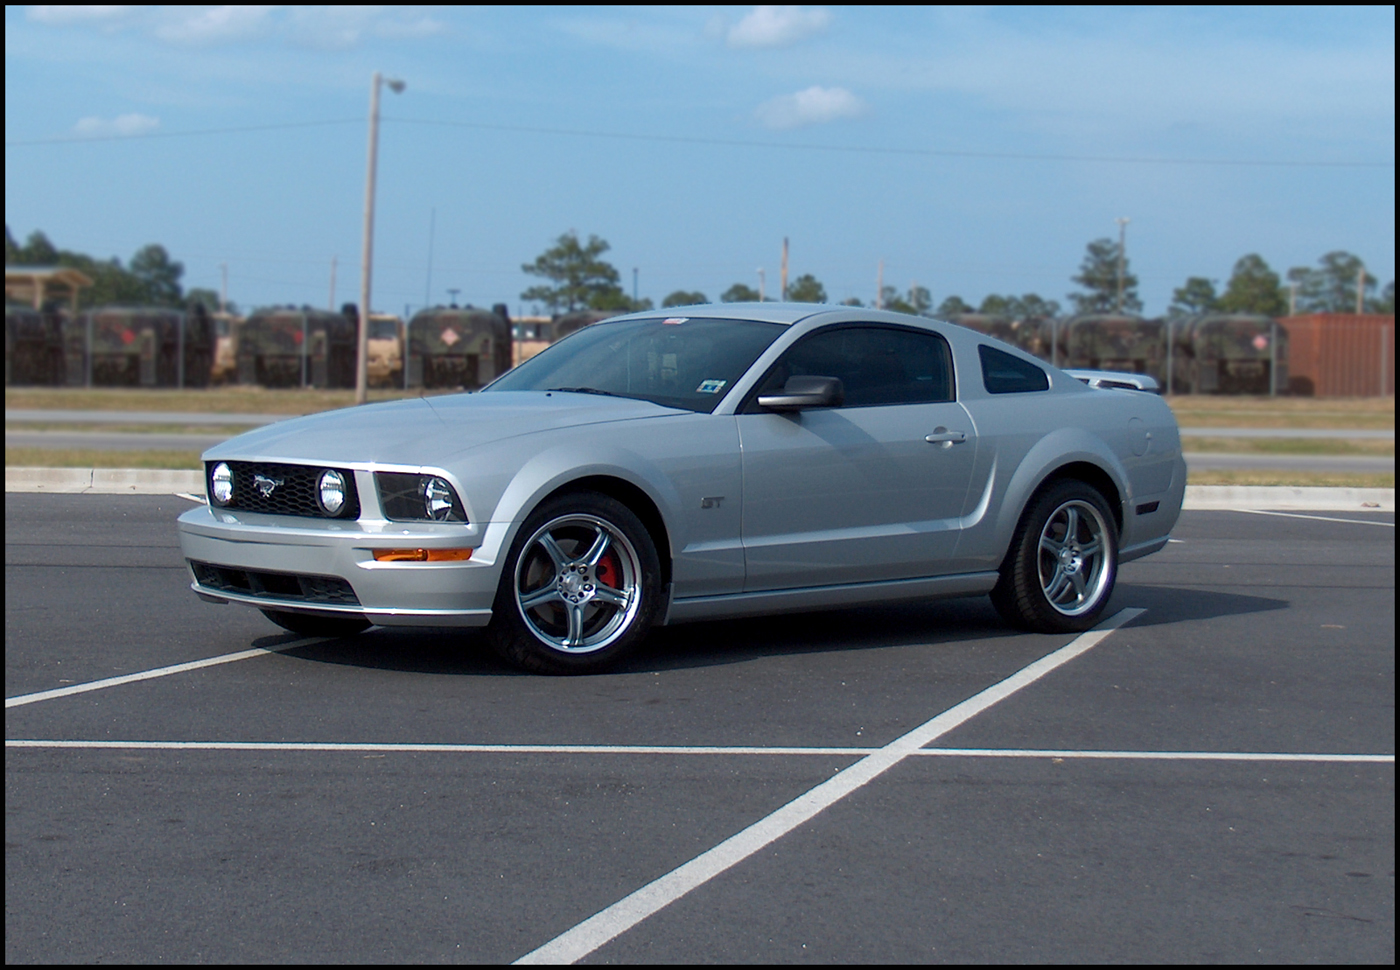 2005 Ford mustang gt quarter mile time #5